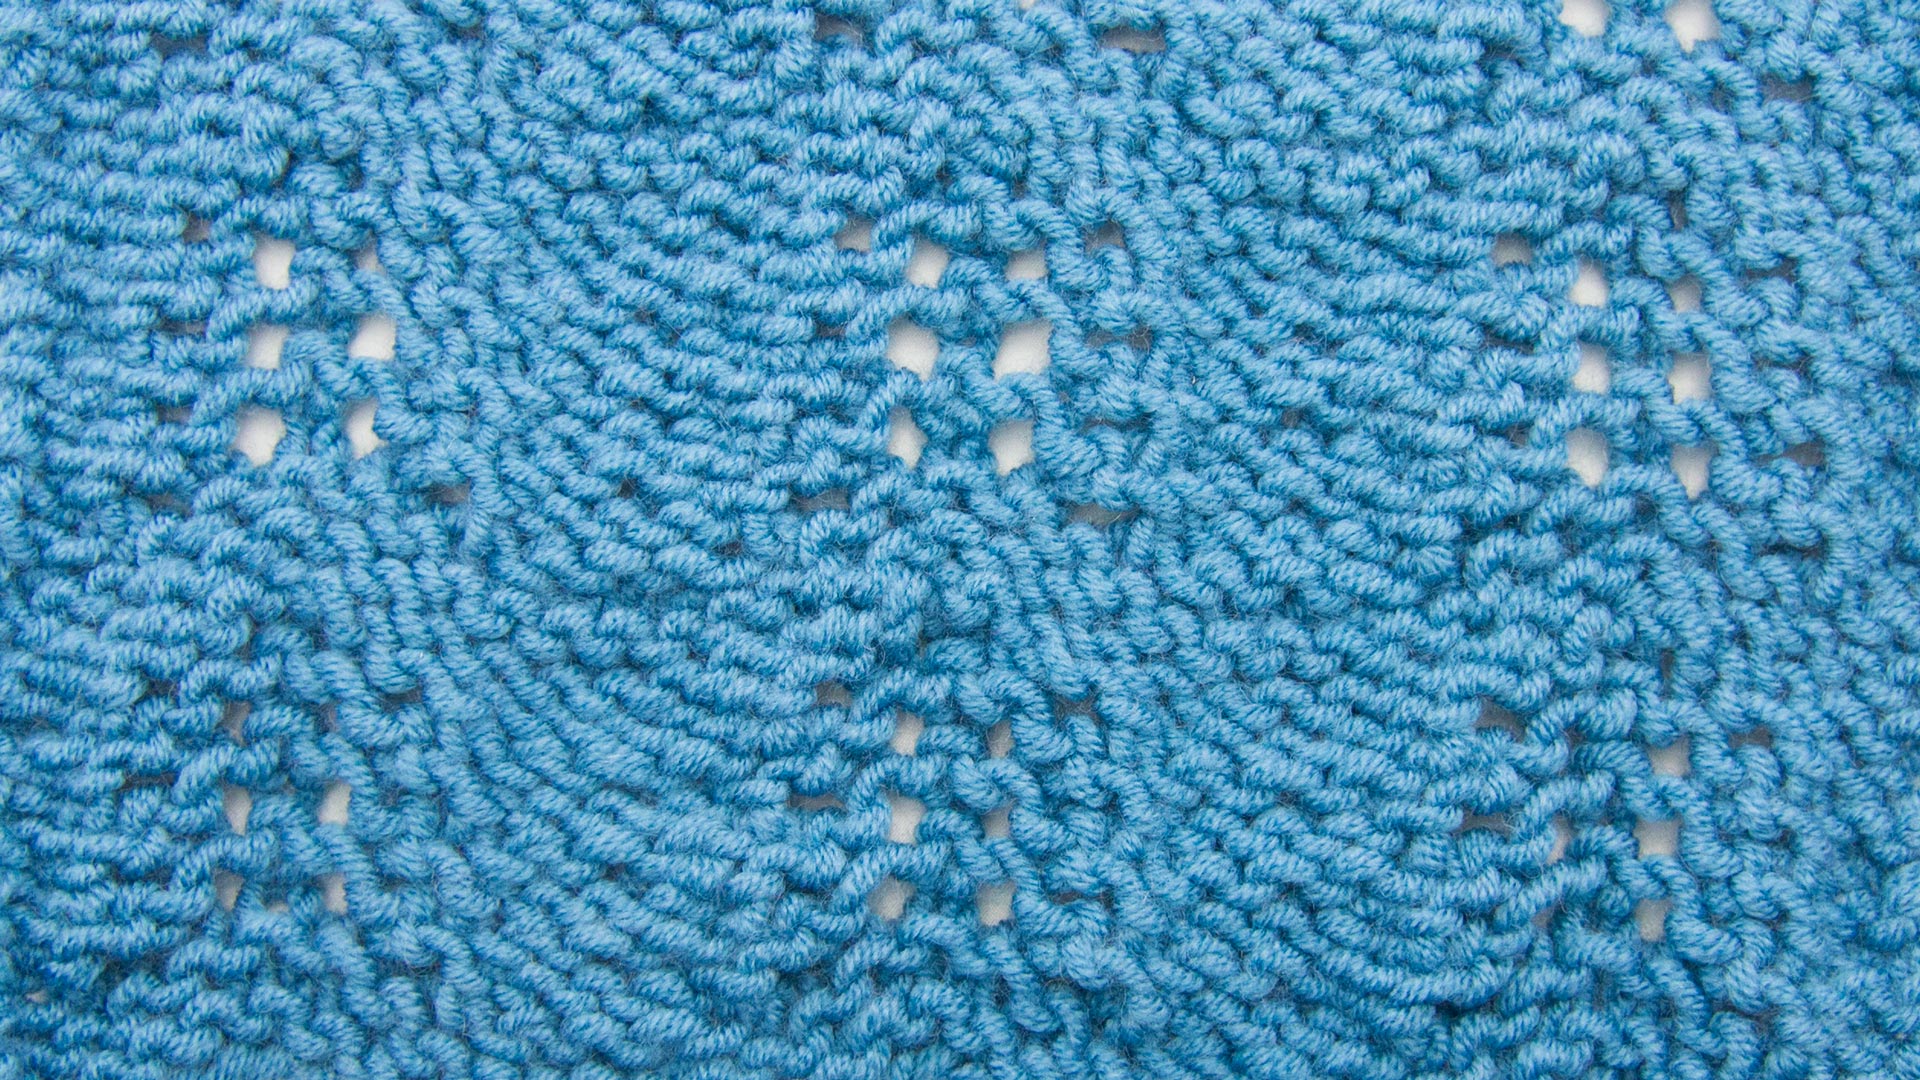 Example of the Crest of the Wave Lace Knitting Stitch Pattern (Wrong Side)